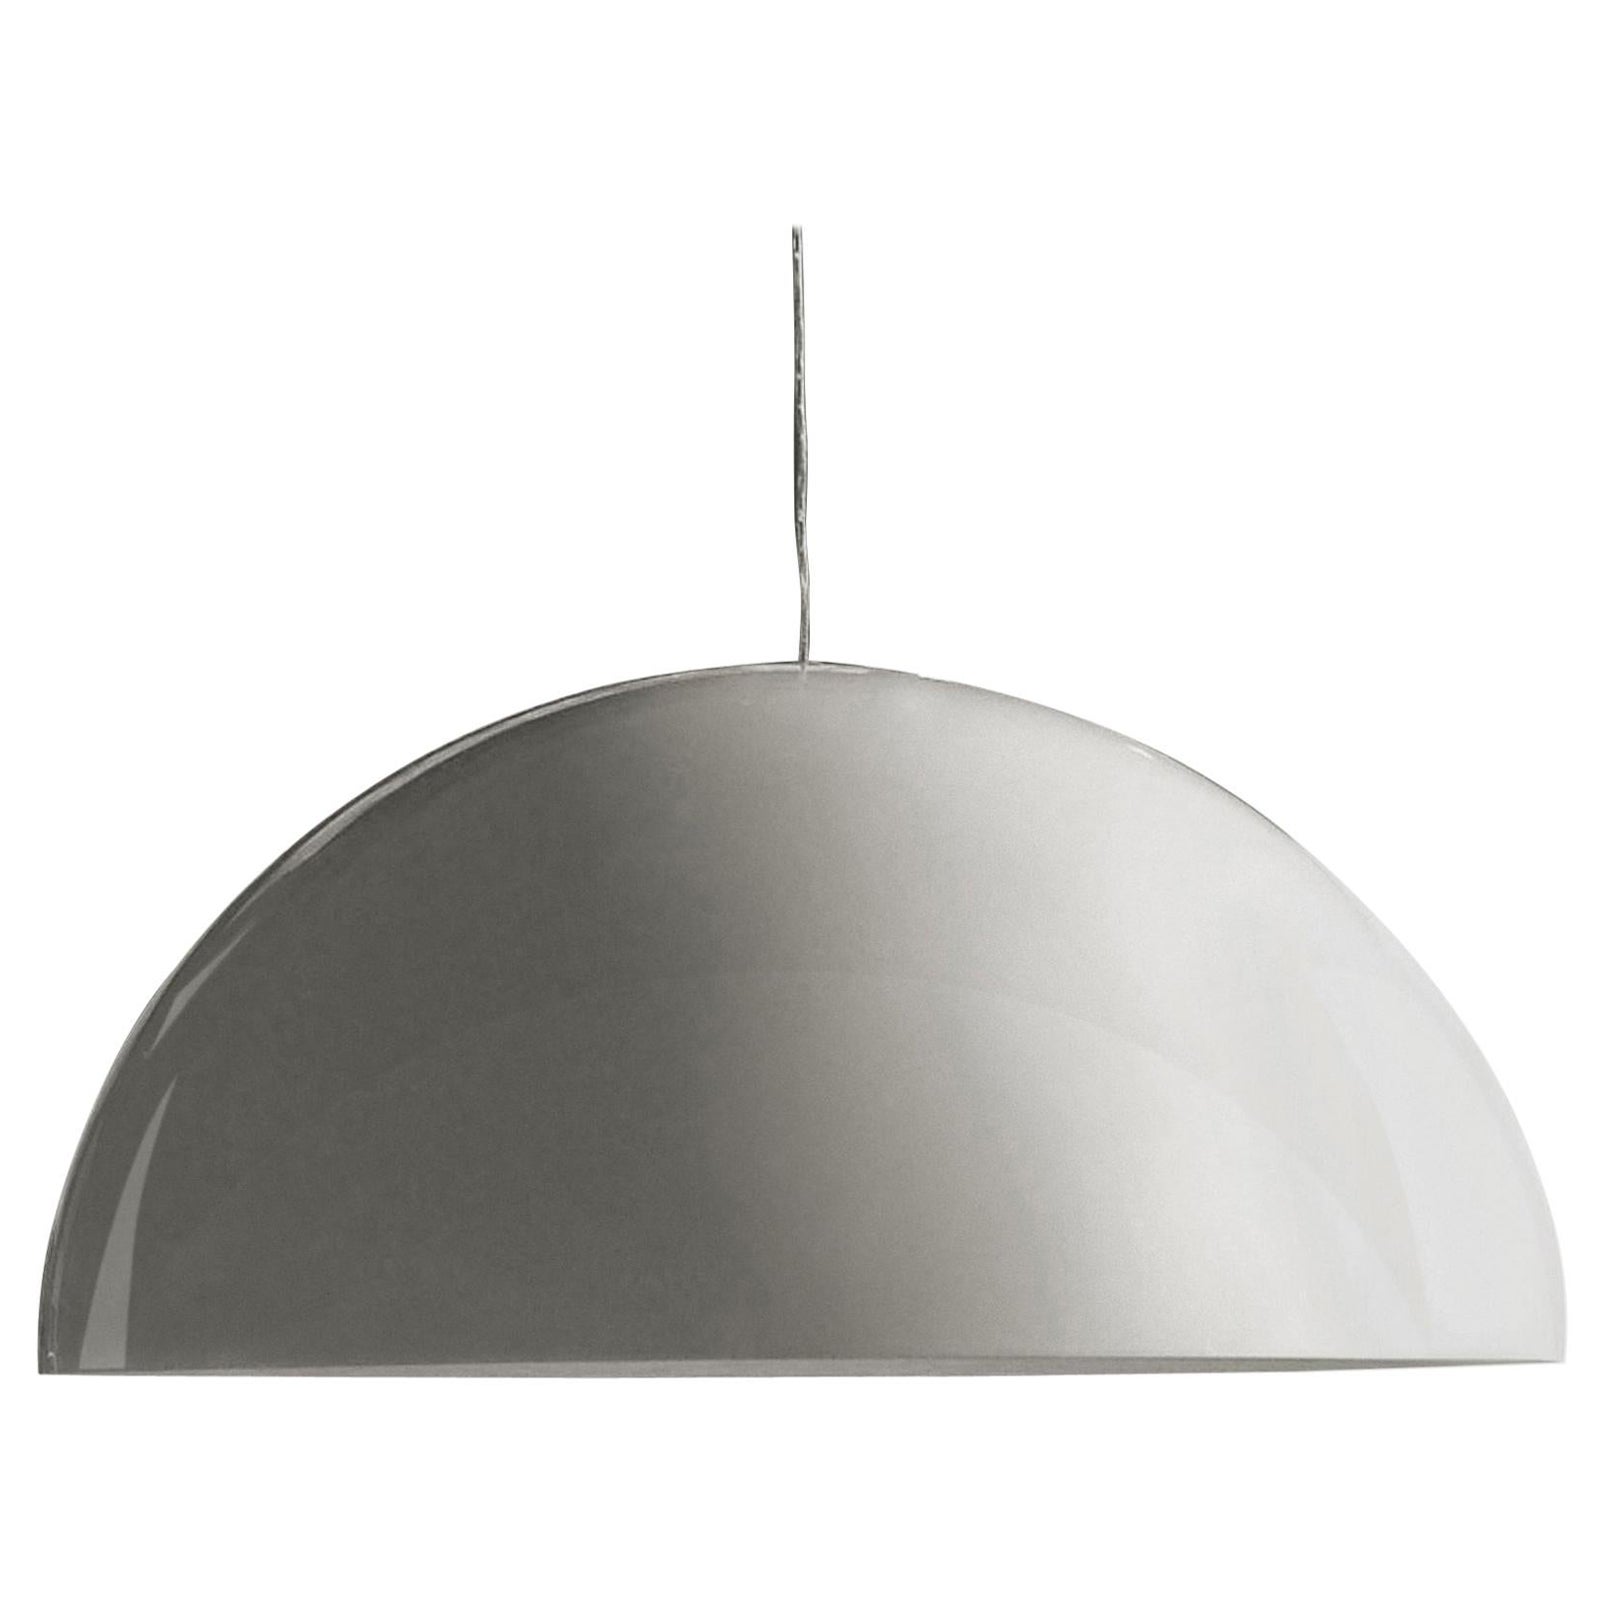 Vico Magistretti Suspension Lamp 'Sonora' 493 Painted White by Oluce For Sale